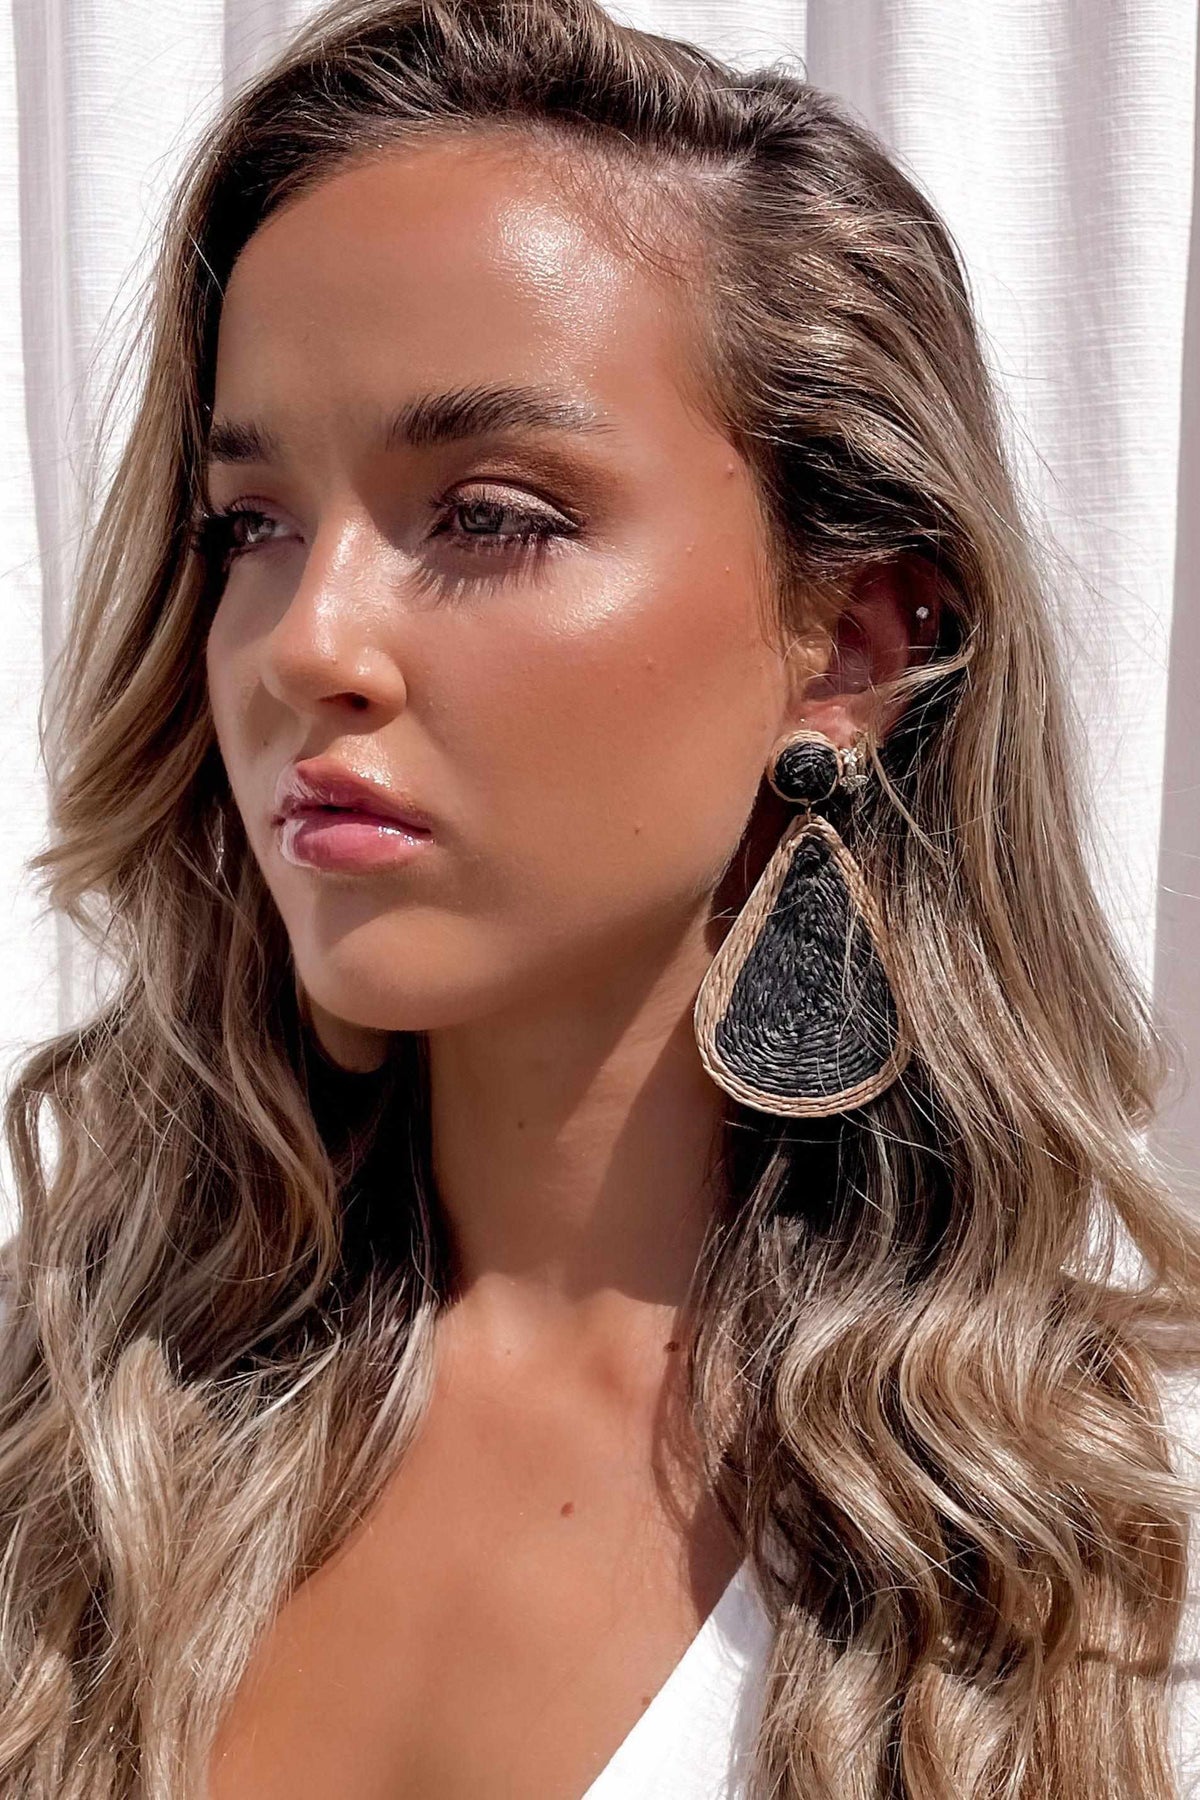 Forever Earrings, ACCESSORIES, EARRINGS, JEWELLERY, NEW ARRIVALS, Our New Forever Earrings Is Now Only $31.00 Exclusive At Mishkah, We Have The Latest Fashion Accessories @ Mishkah Online Fashion Boutique Our New Forever Earrings is now only $31.00-MISHKAH